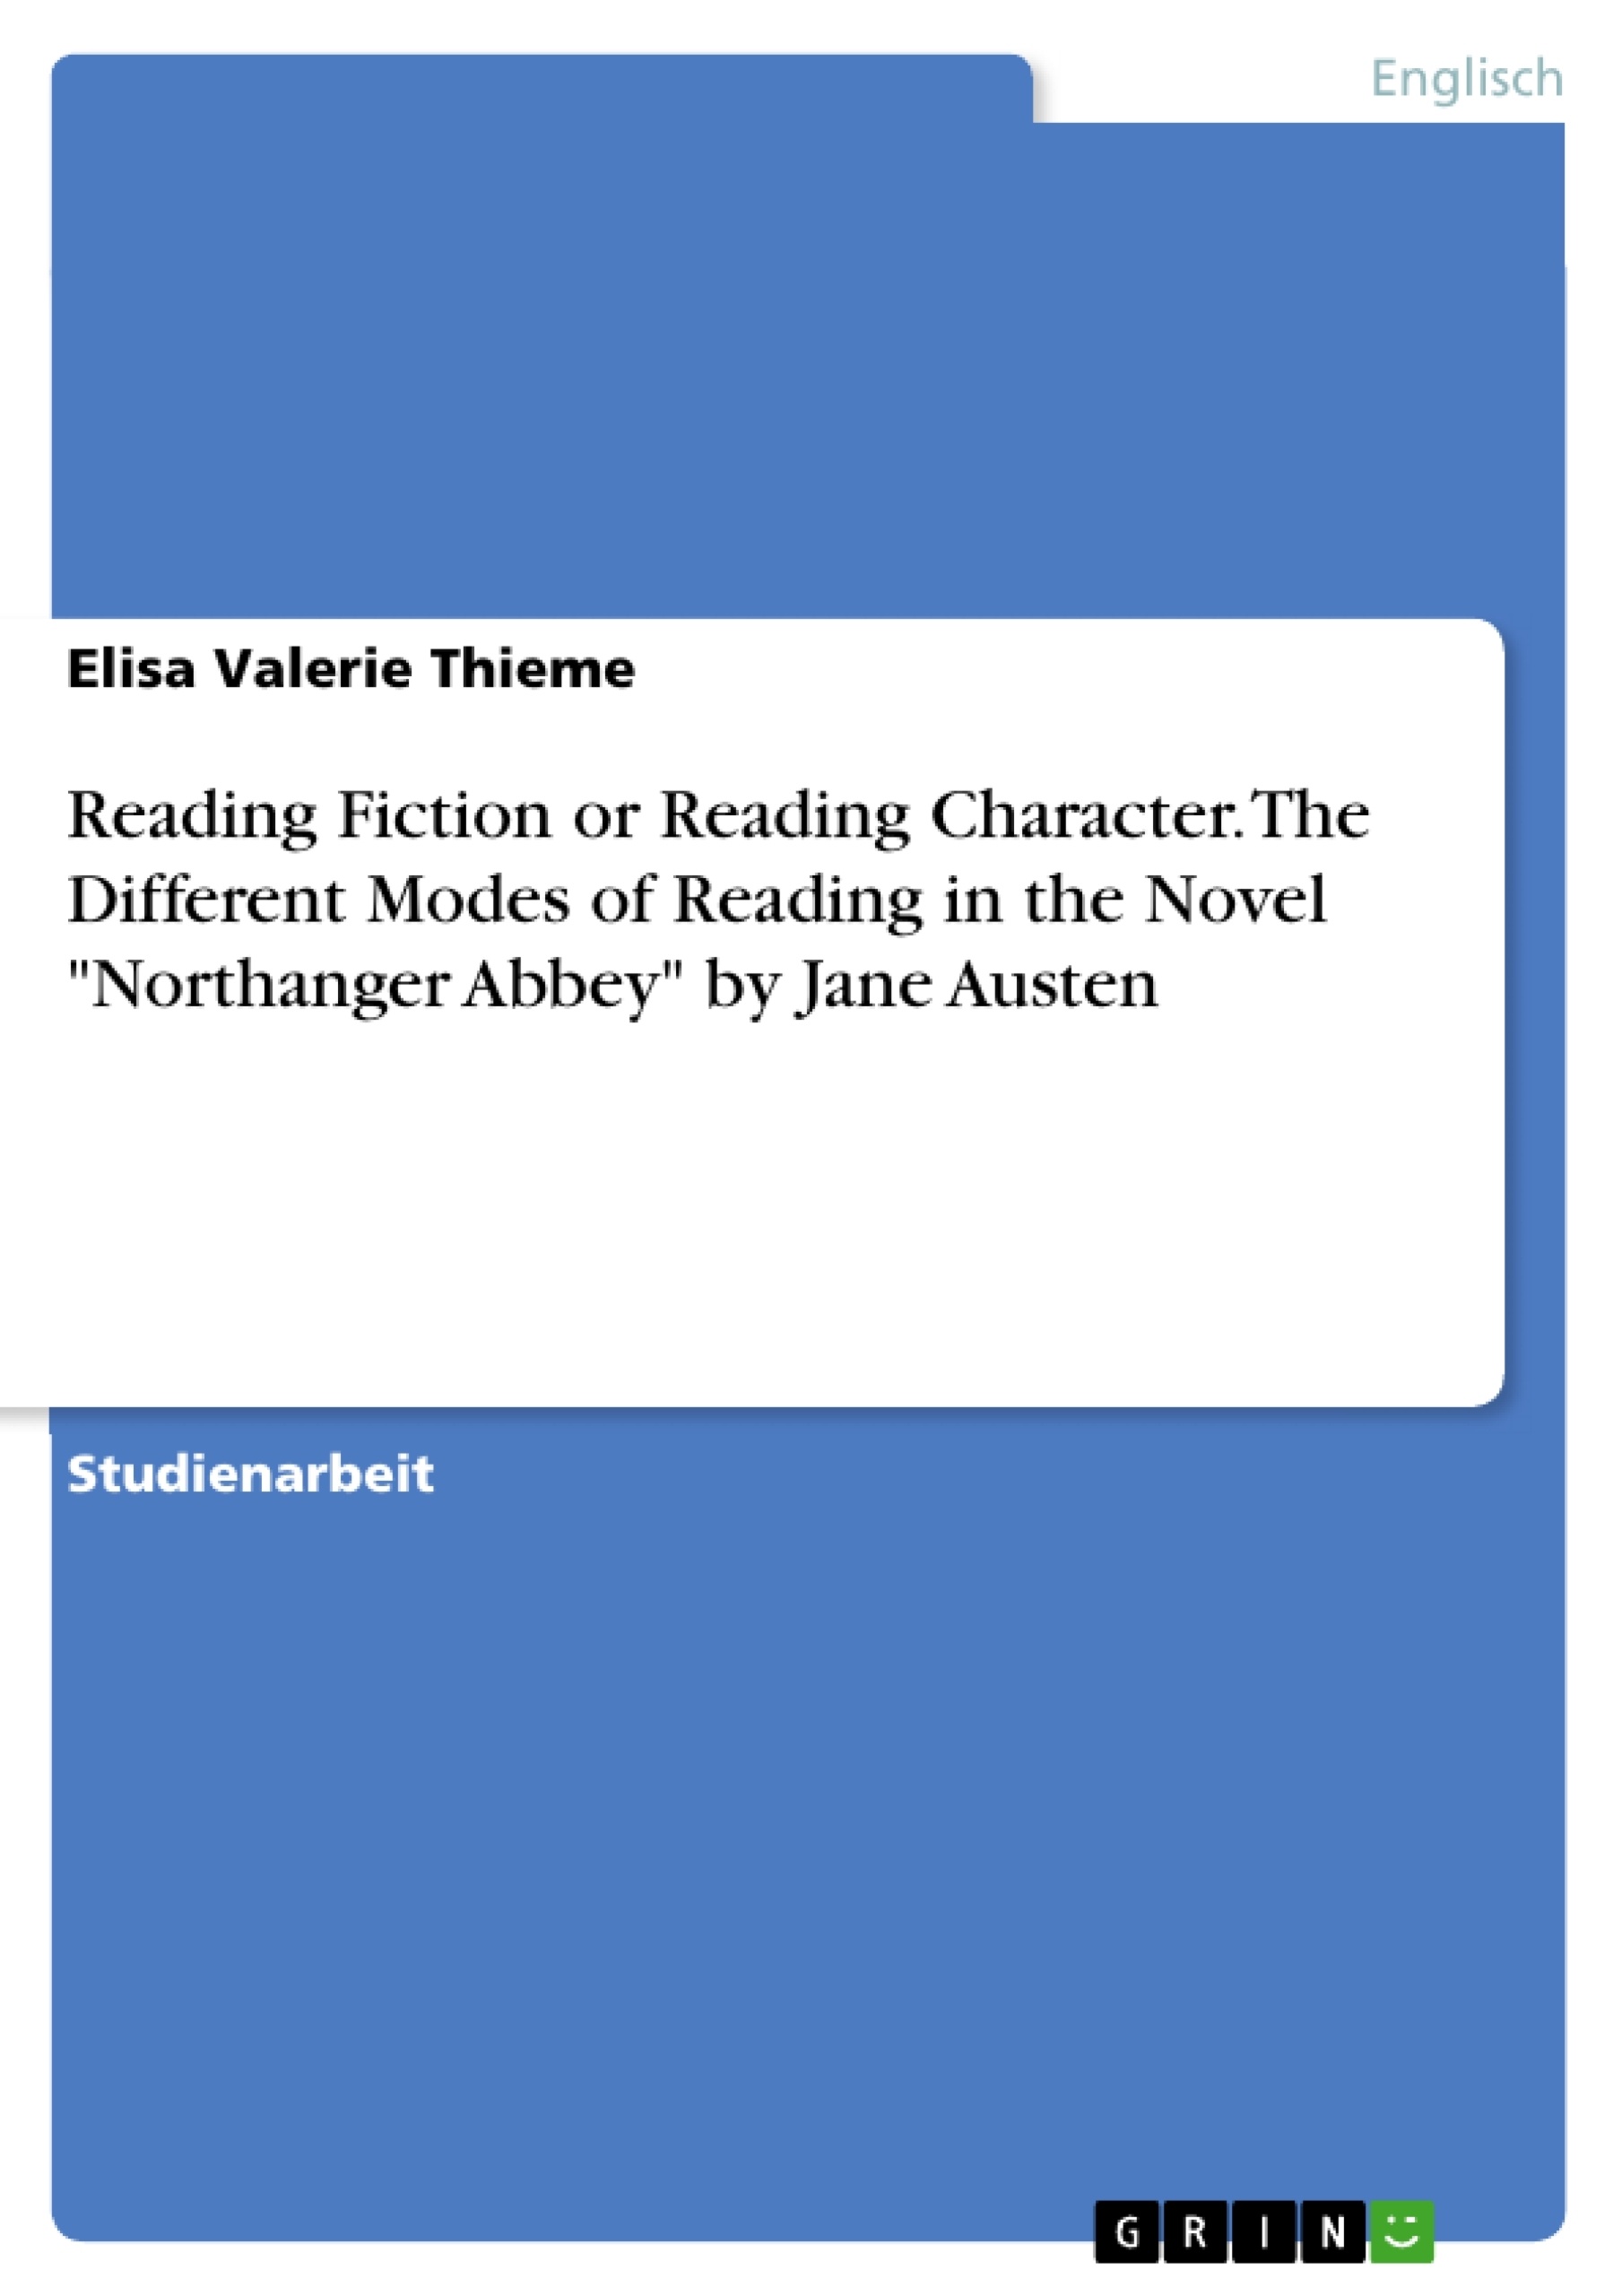 Título: Reading Fiction or Reading Character. The Different Modes of Reading in the Novel "Northanger Abbey" by Jane Austen